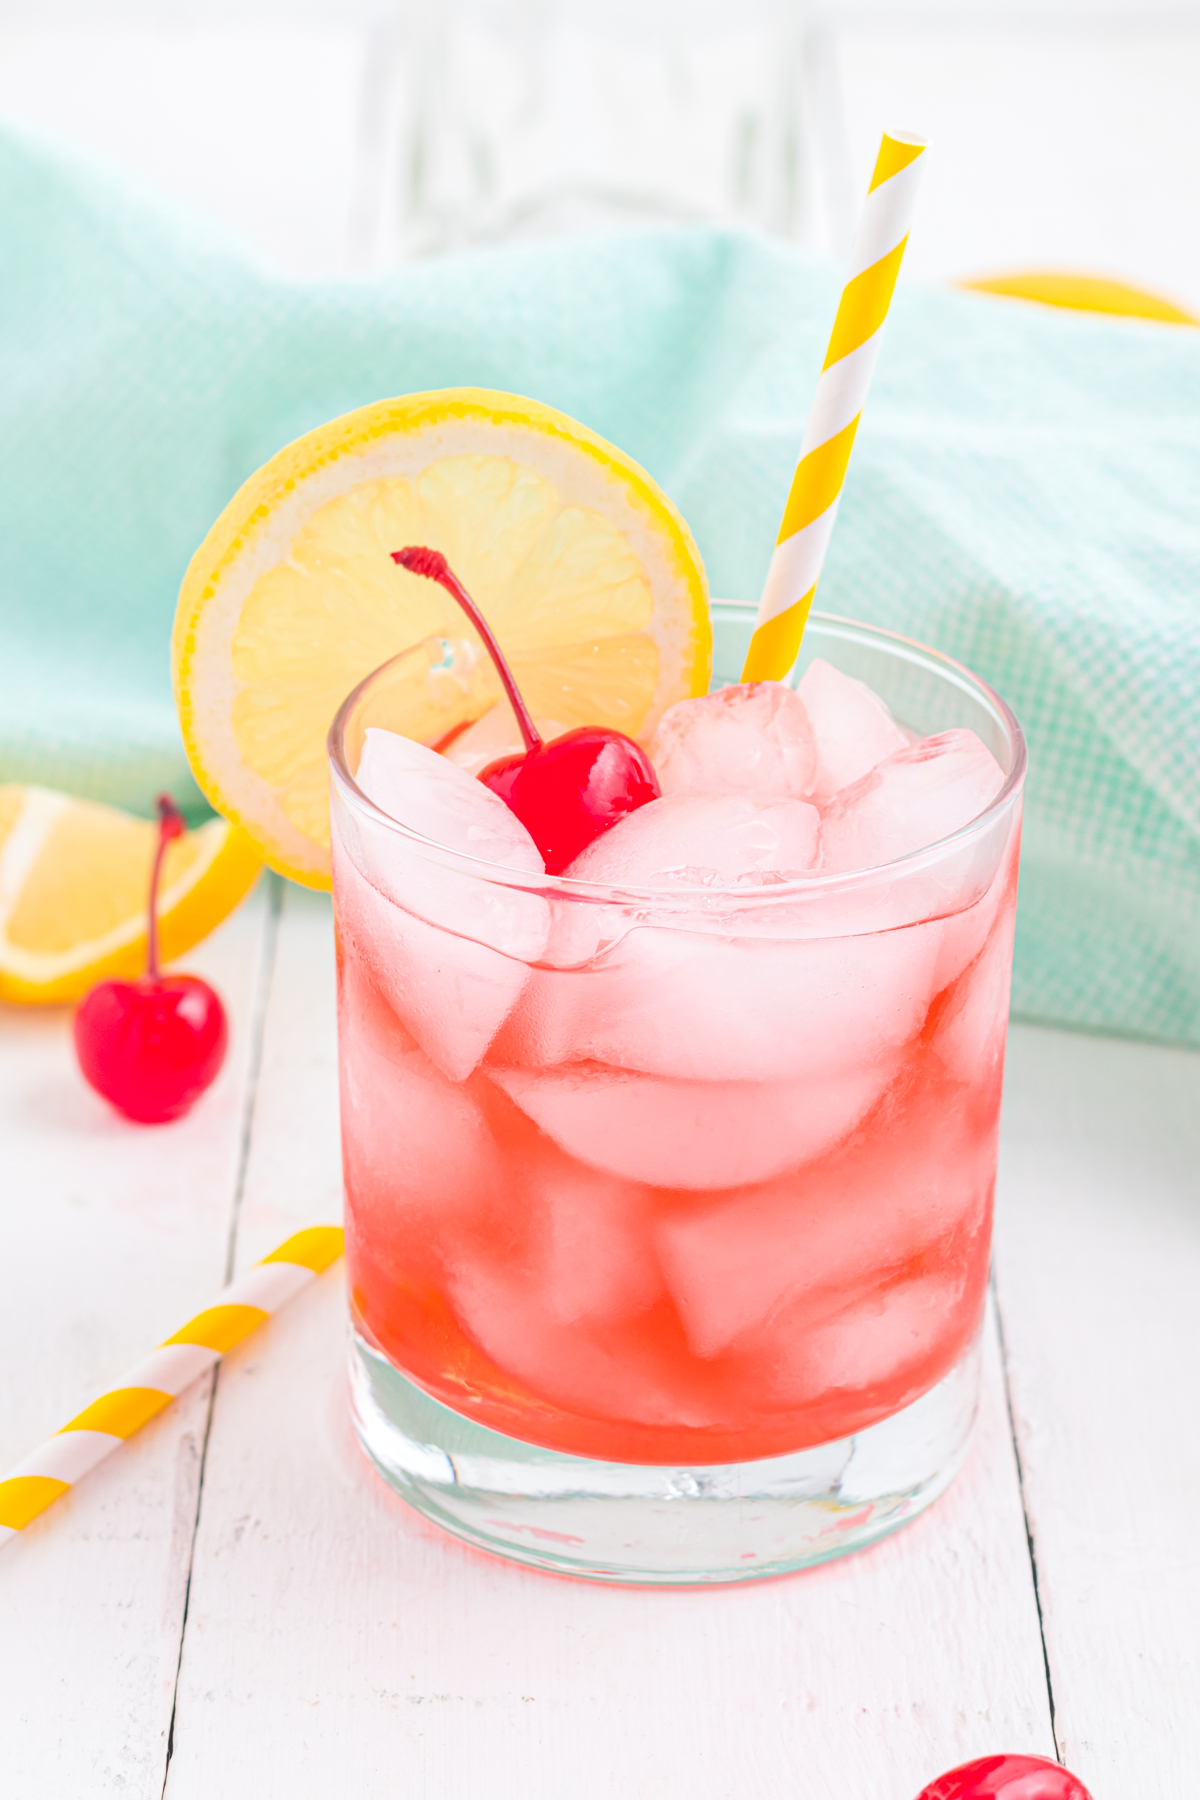 Cherry Vodka sour with a yellow straw and maraschino cherry and lemon slice for garnish